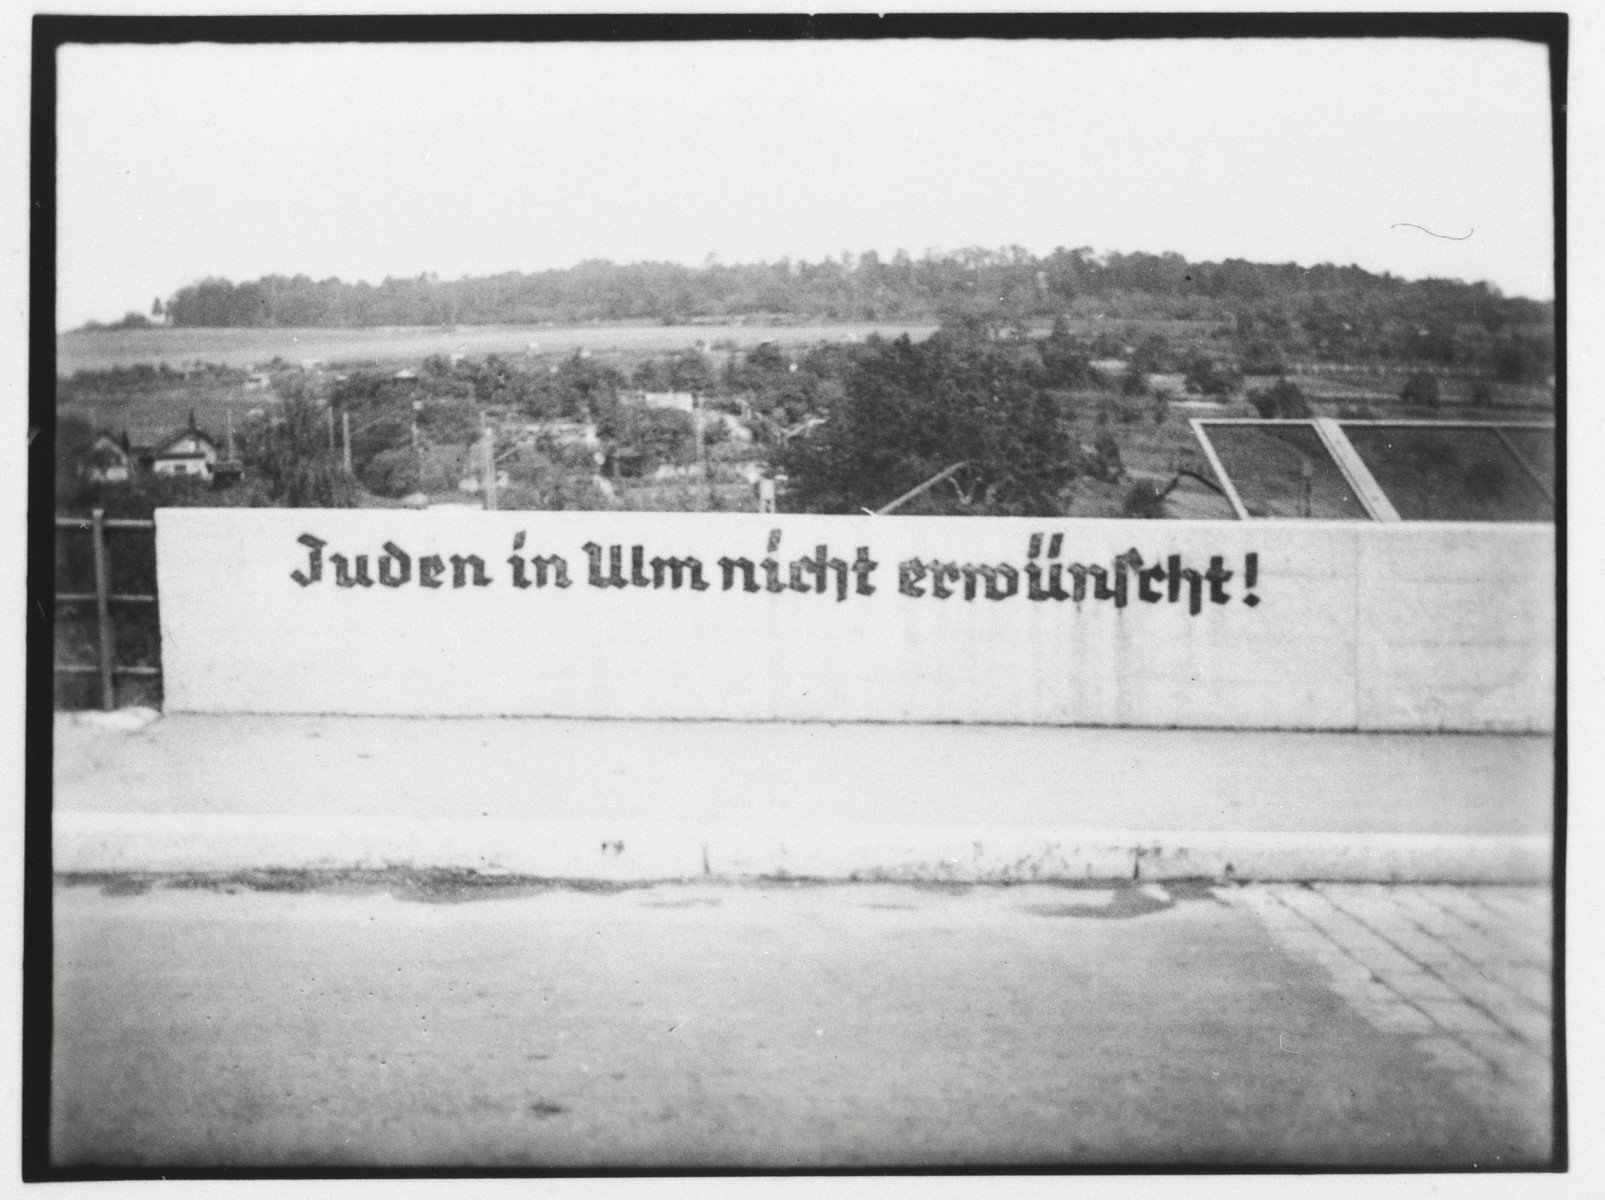 View of a sign painted on the Stuttgarter Strasse bridge in Ulm reading "Jews are not desireable in Ulm".